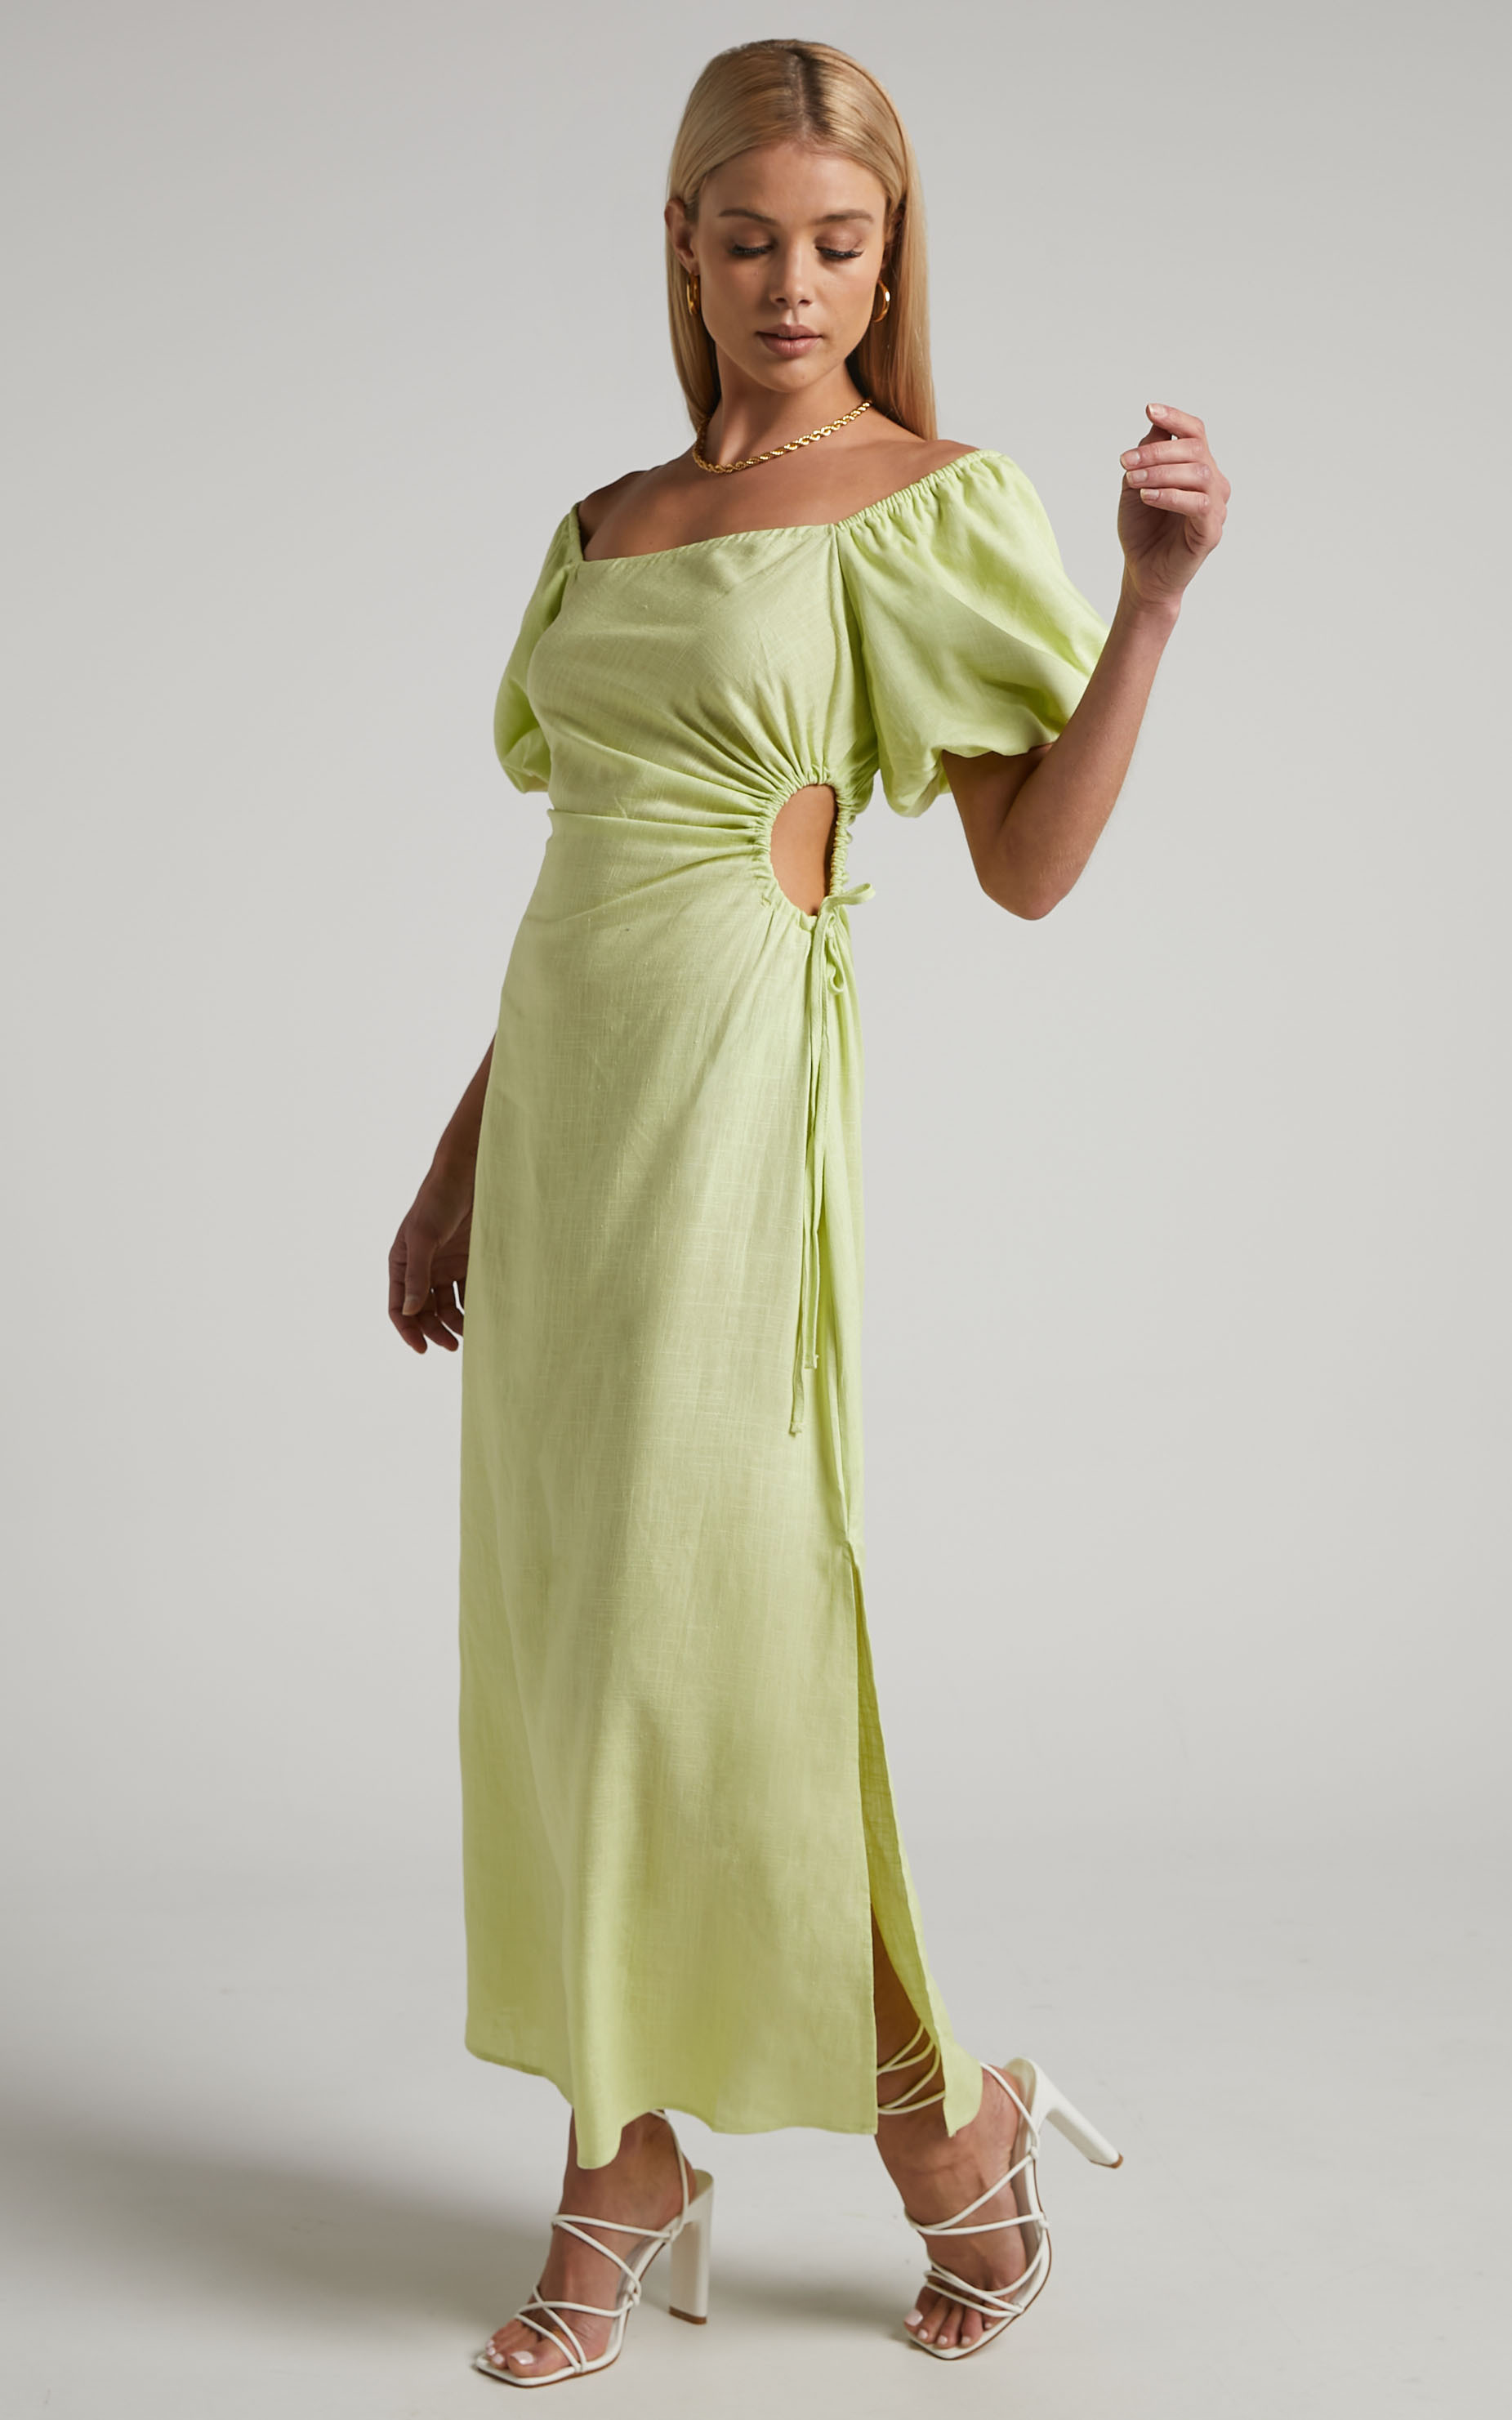 Ebony Maxi Dress - Side Cut Out Square Neck Puff Sleeve Dress in Citrus - 06, YEL1, hi-res image number null